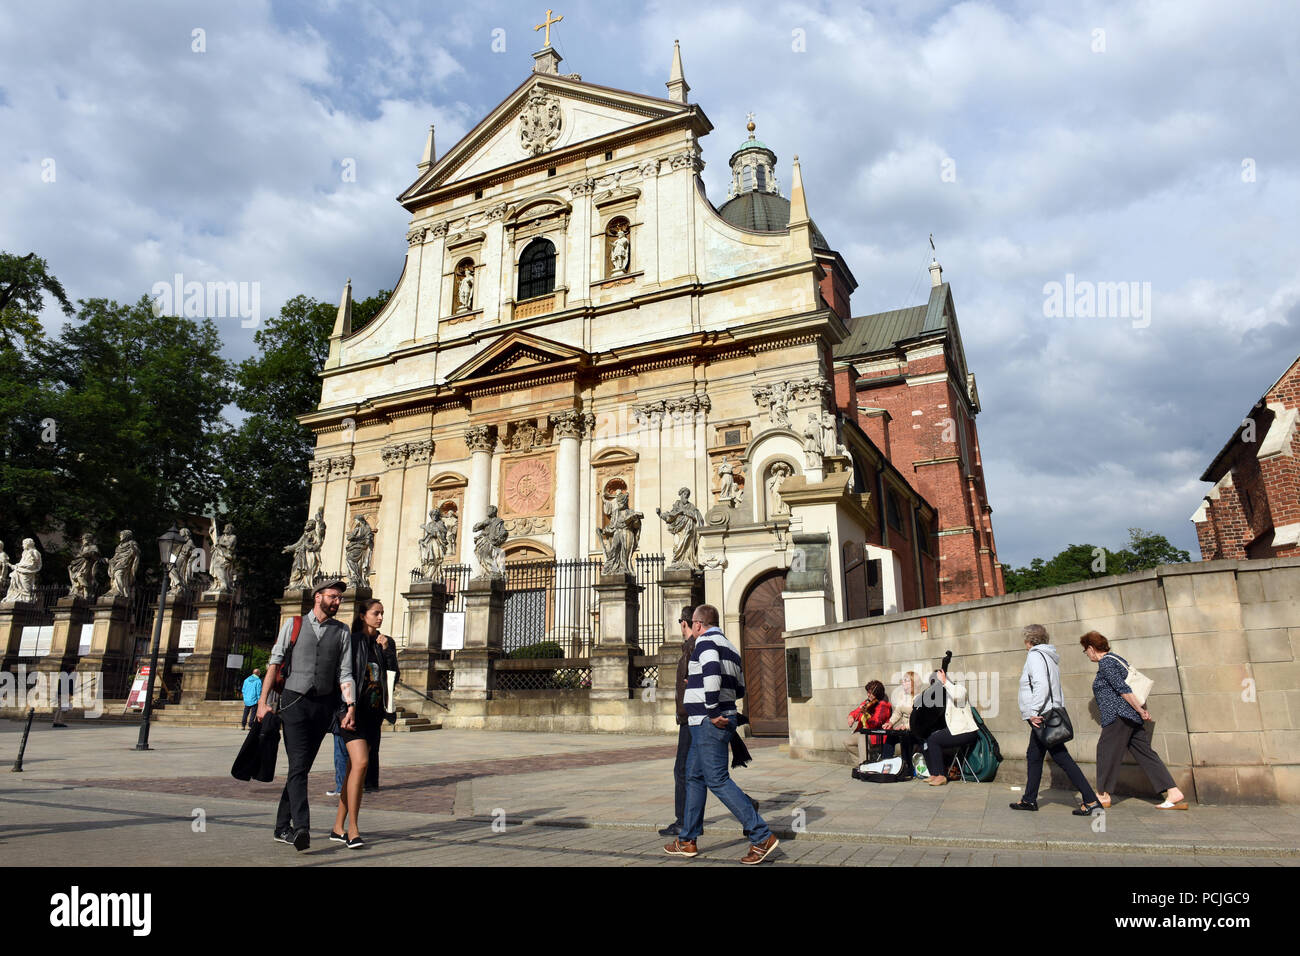 Church of St. Peter and St. Paul in Krakow Poland Stock Photo